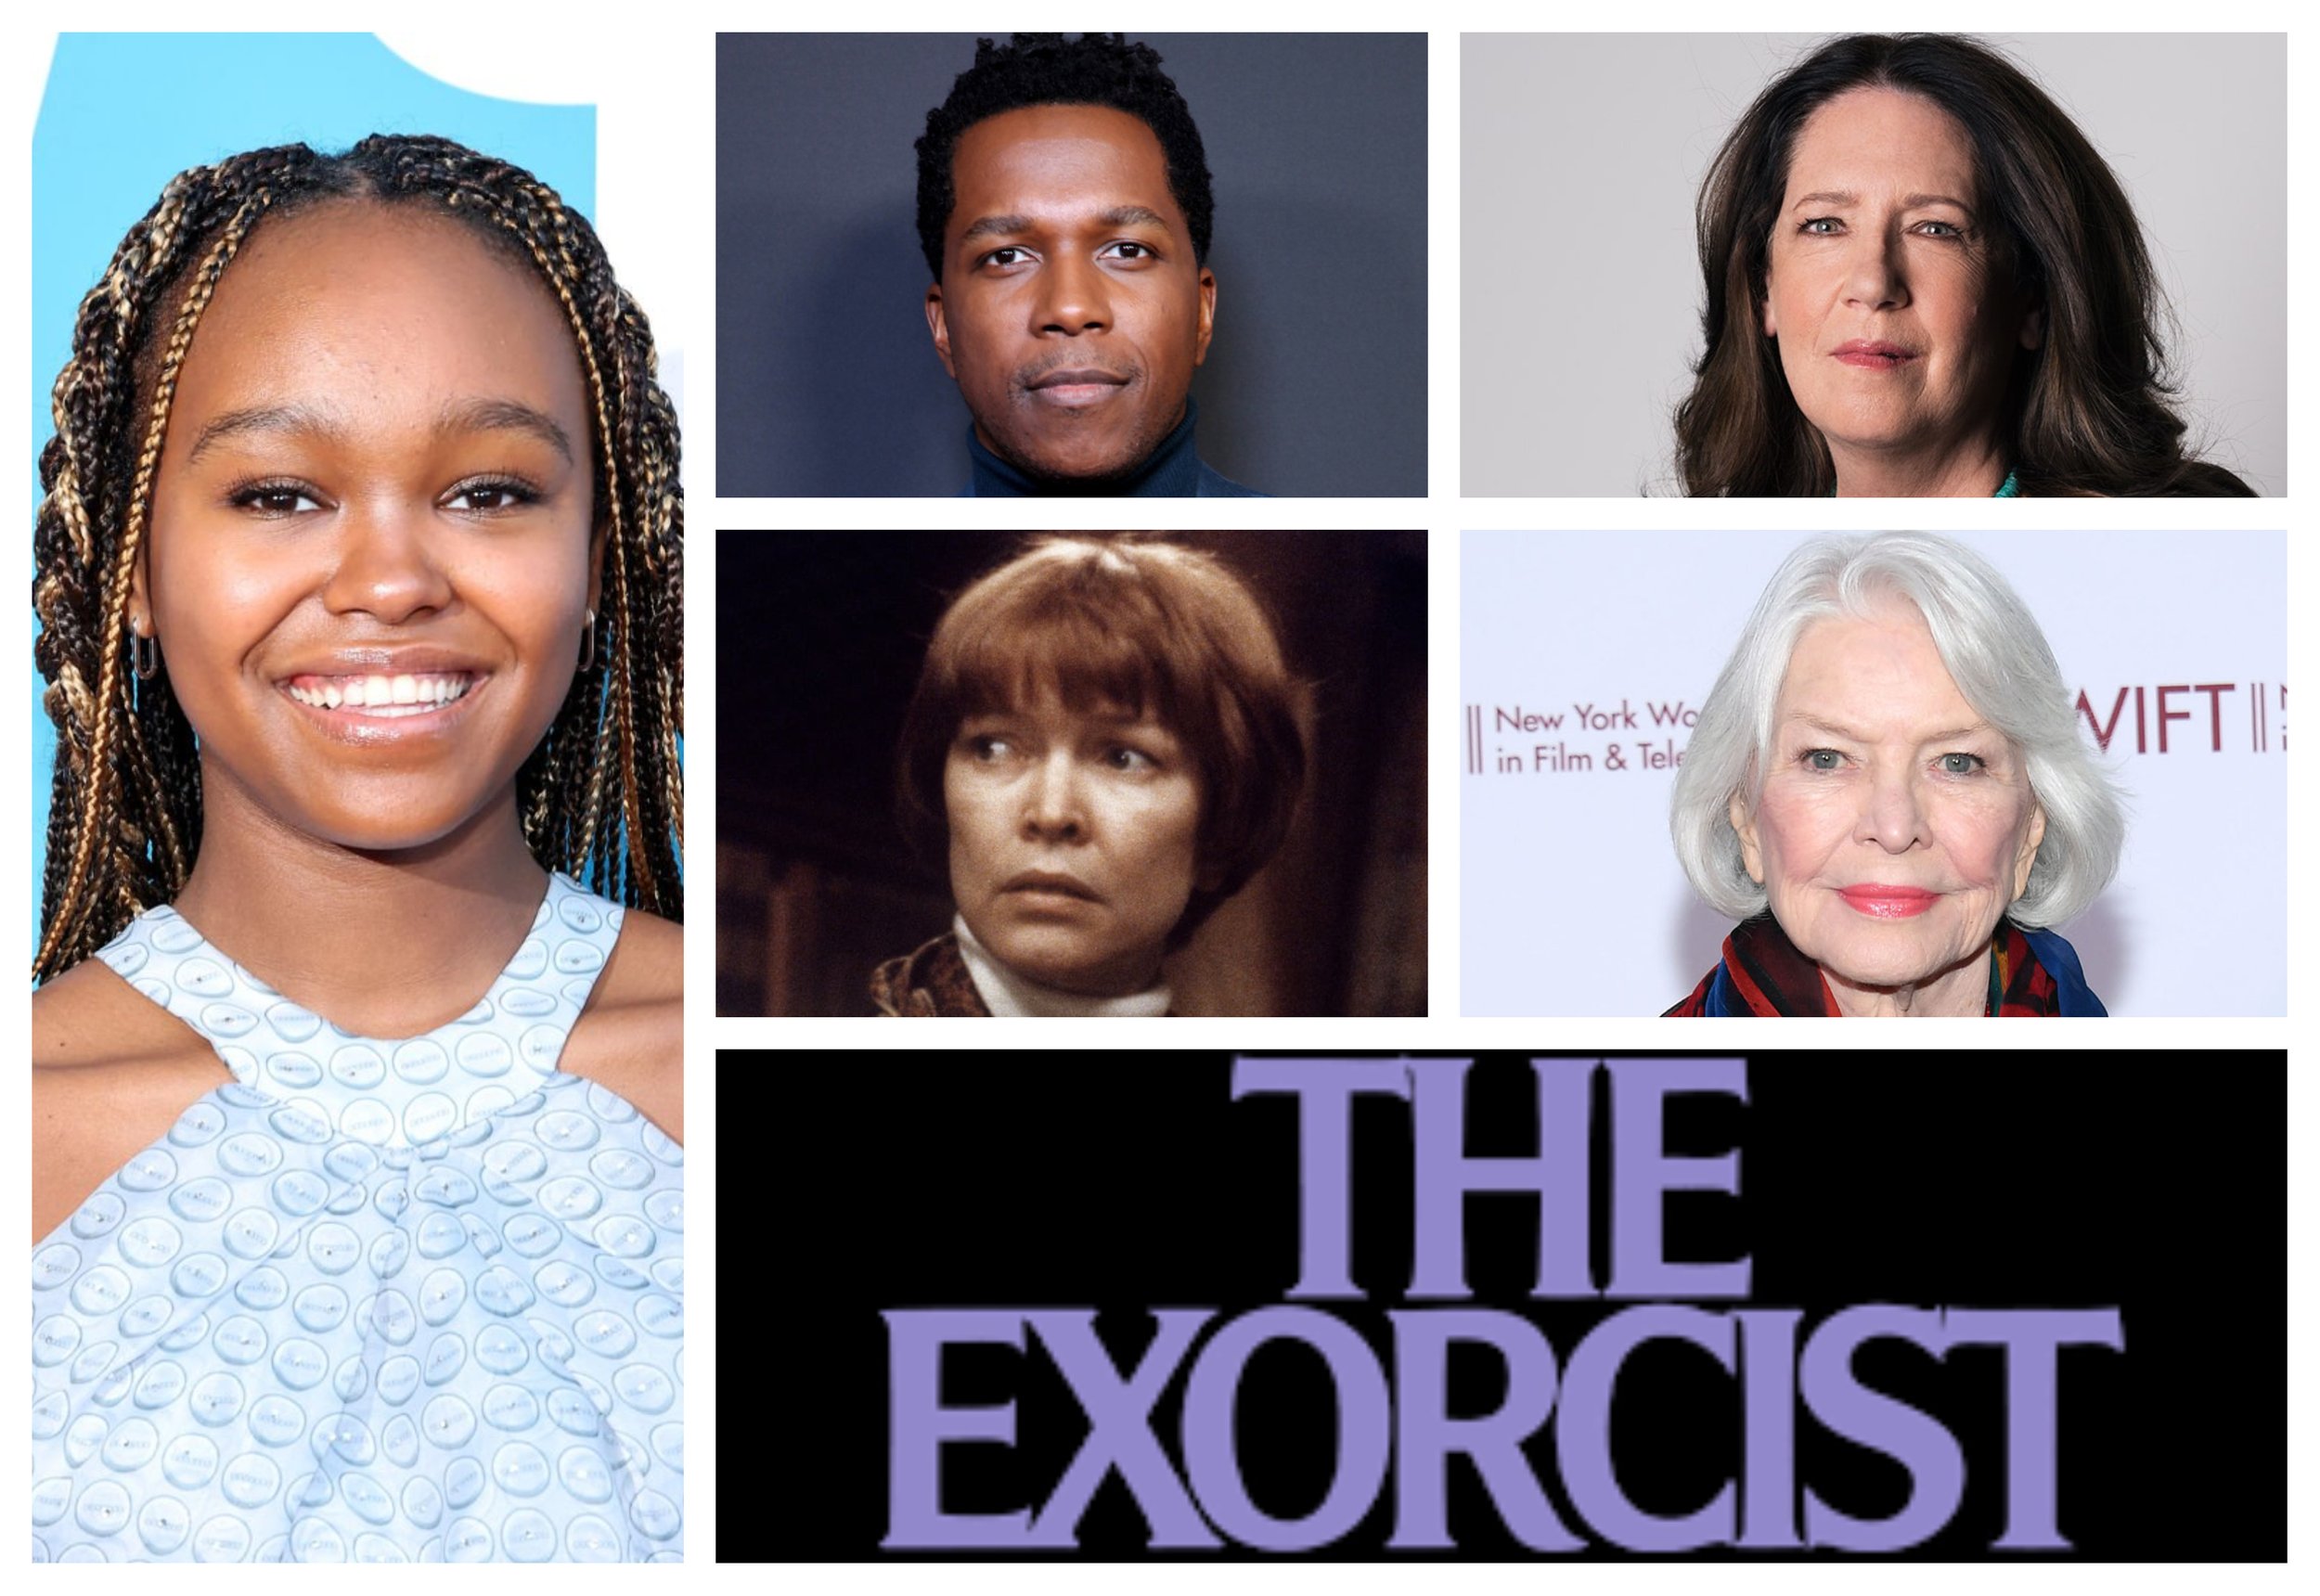 Lidya Jewett To Star In ‘The Exorcist’ Movie Reboot, Joins Leslie Odom